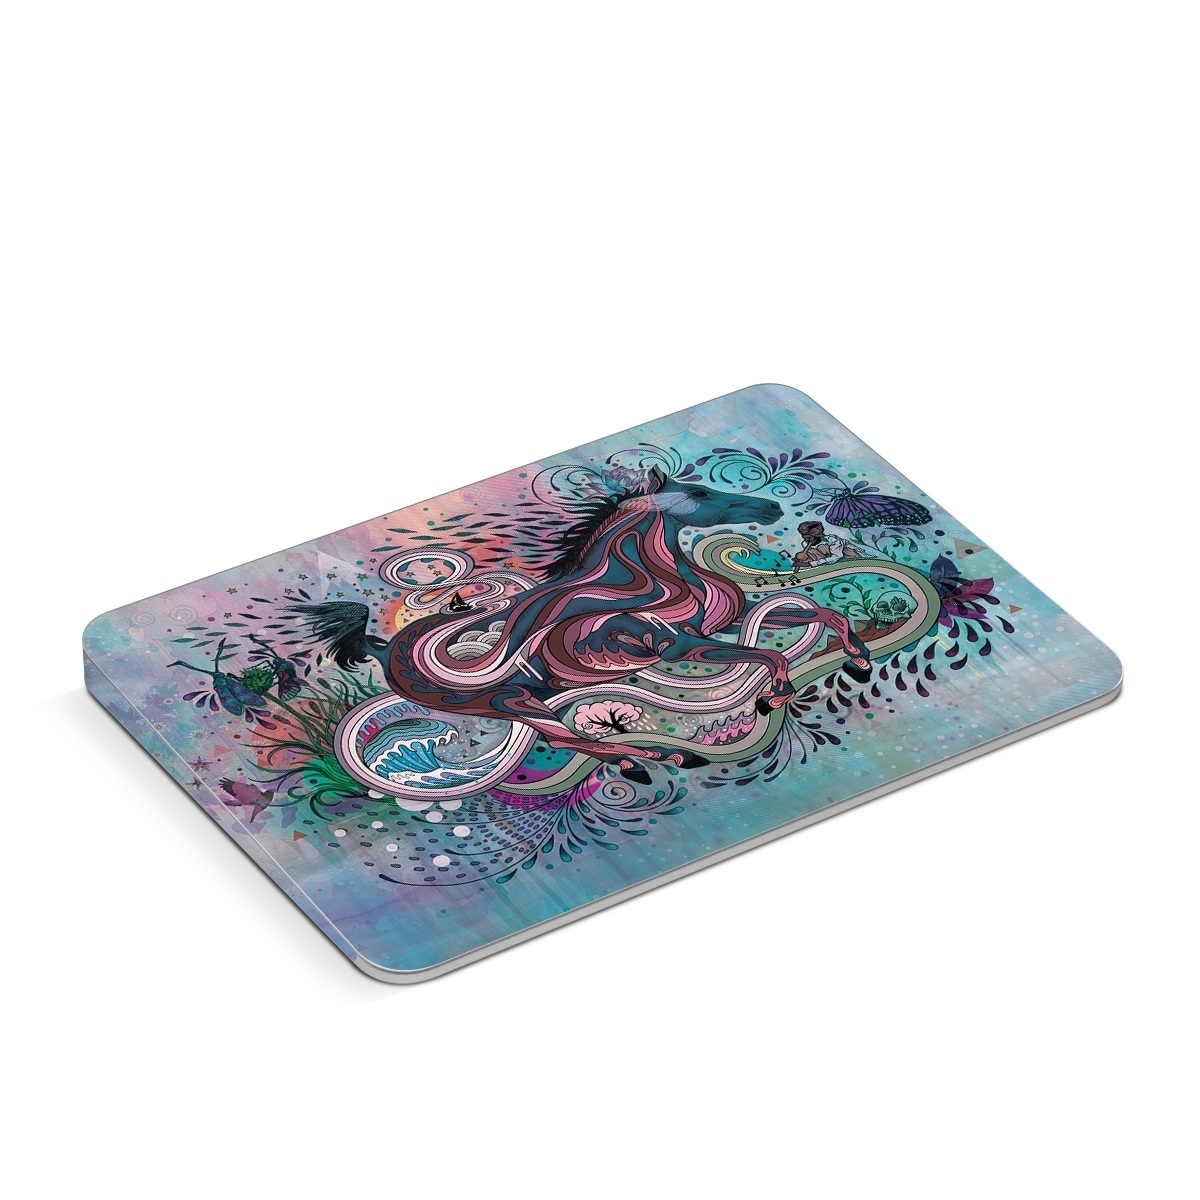 Apple Magic Trackpad Skin design of Illustration, Art, Visual arts, Graphic design, Fictional character, Psychedelic art, Pattern, Drawing, Painting, Mythology, with gray, black, blue, red, purple colors